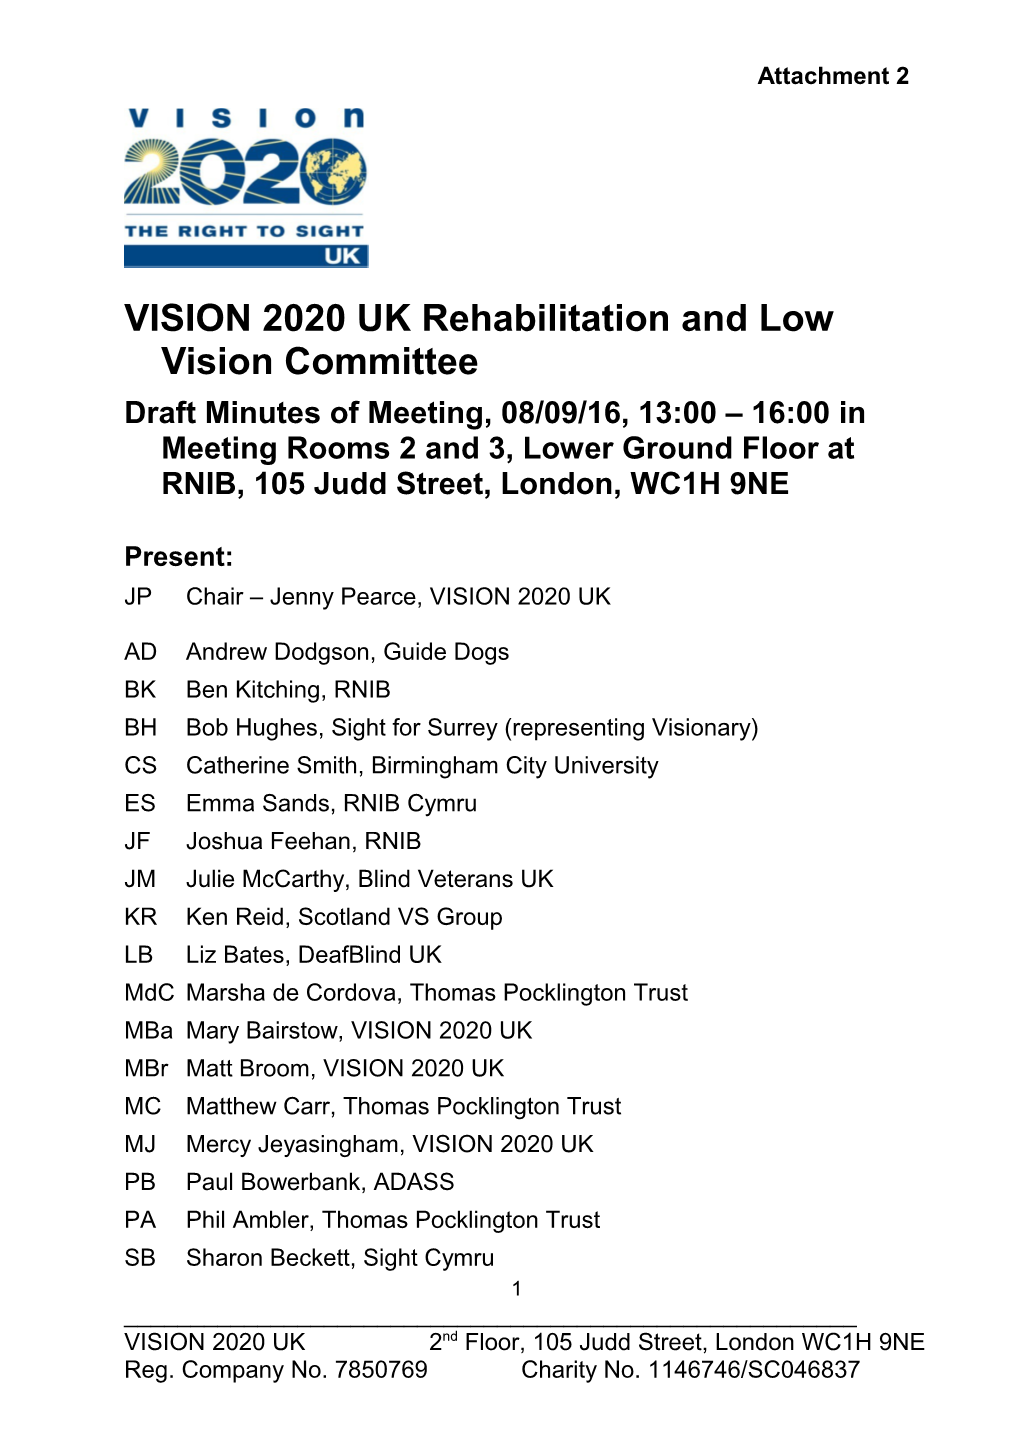 VISION 2020 UK Rehabilitation and Low Vision Committee